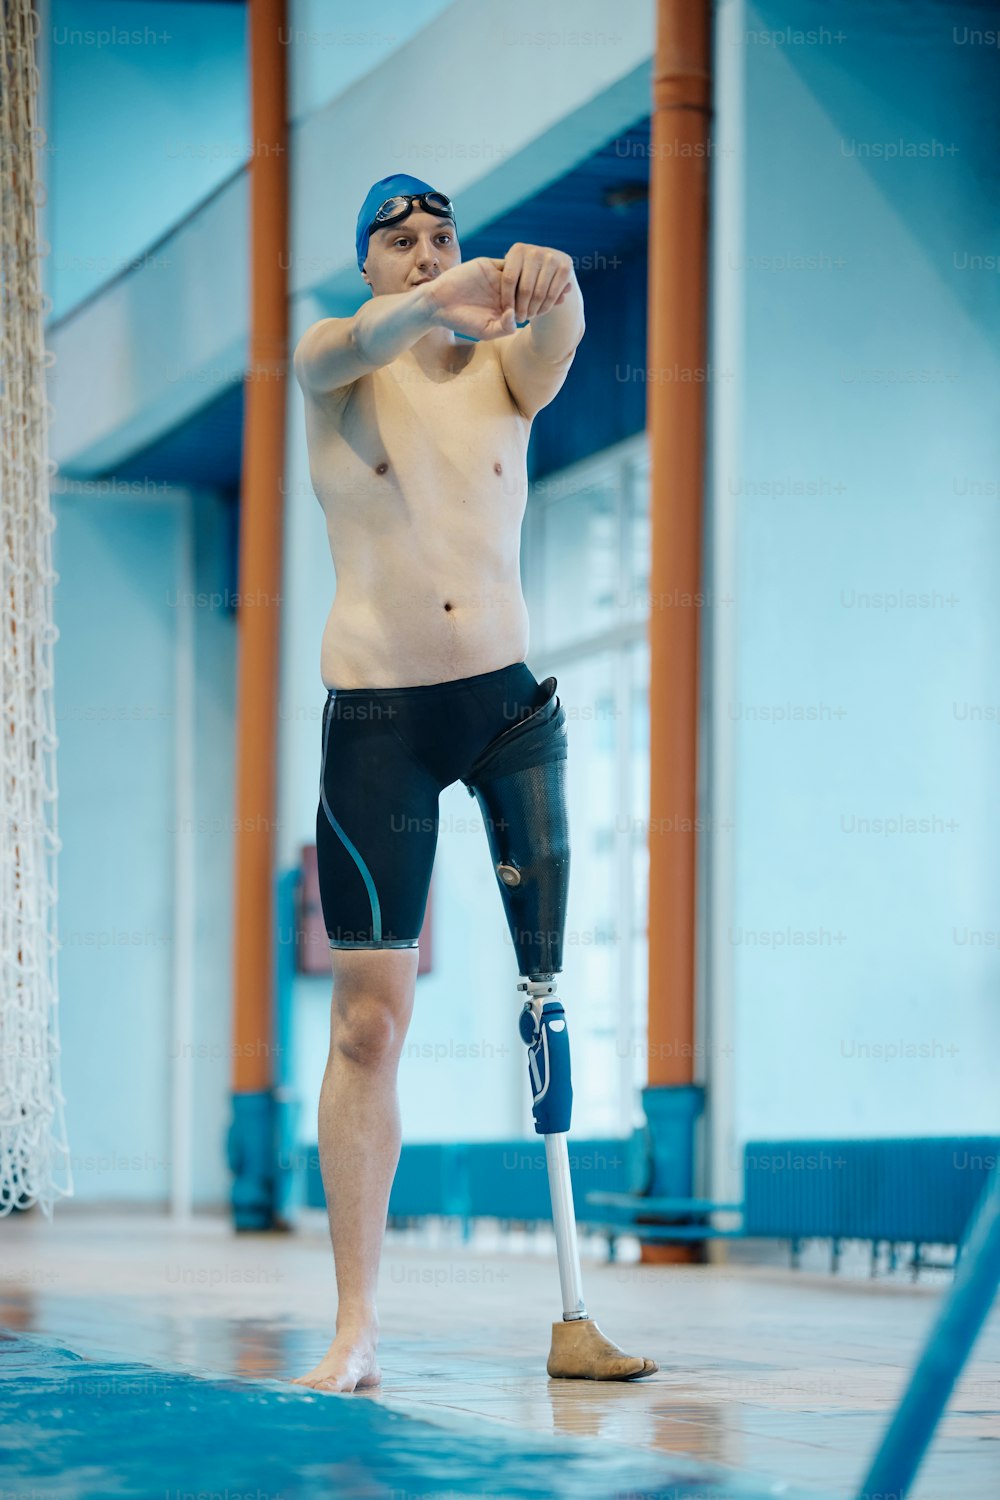 Full length of swimmer with artificial leg ding relaxation exercises while warming up for swimming training at indoor pool.